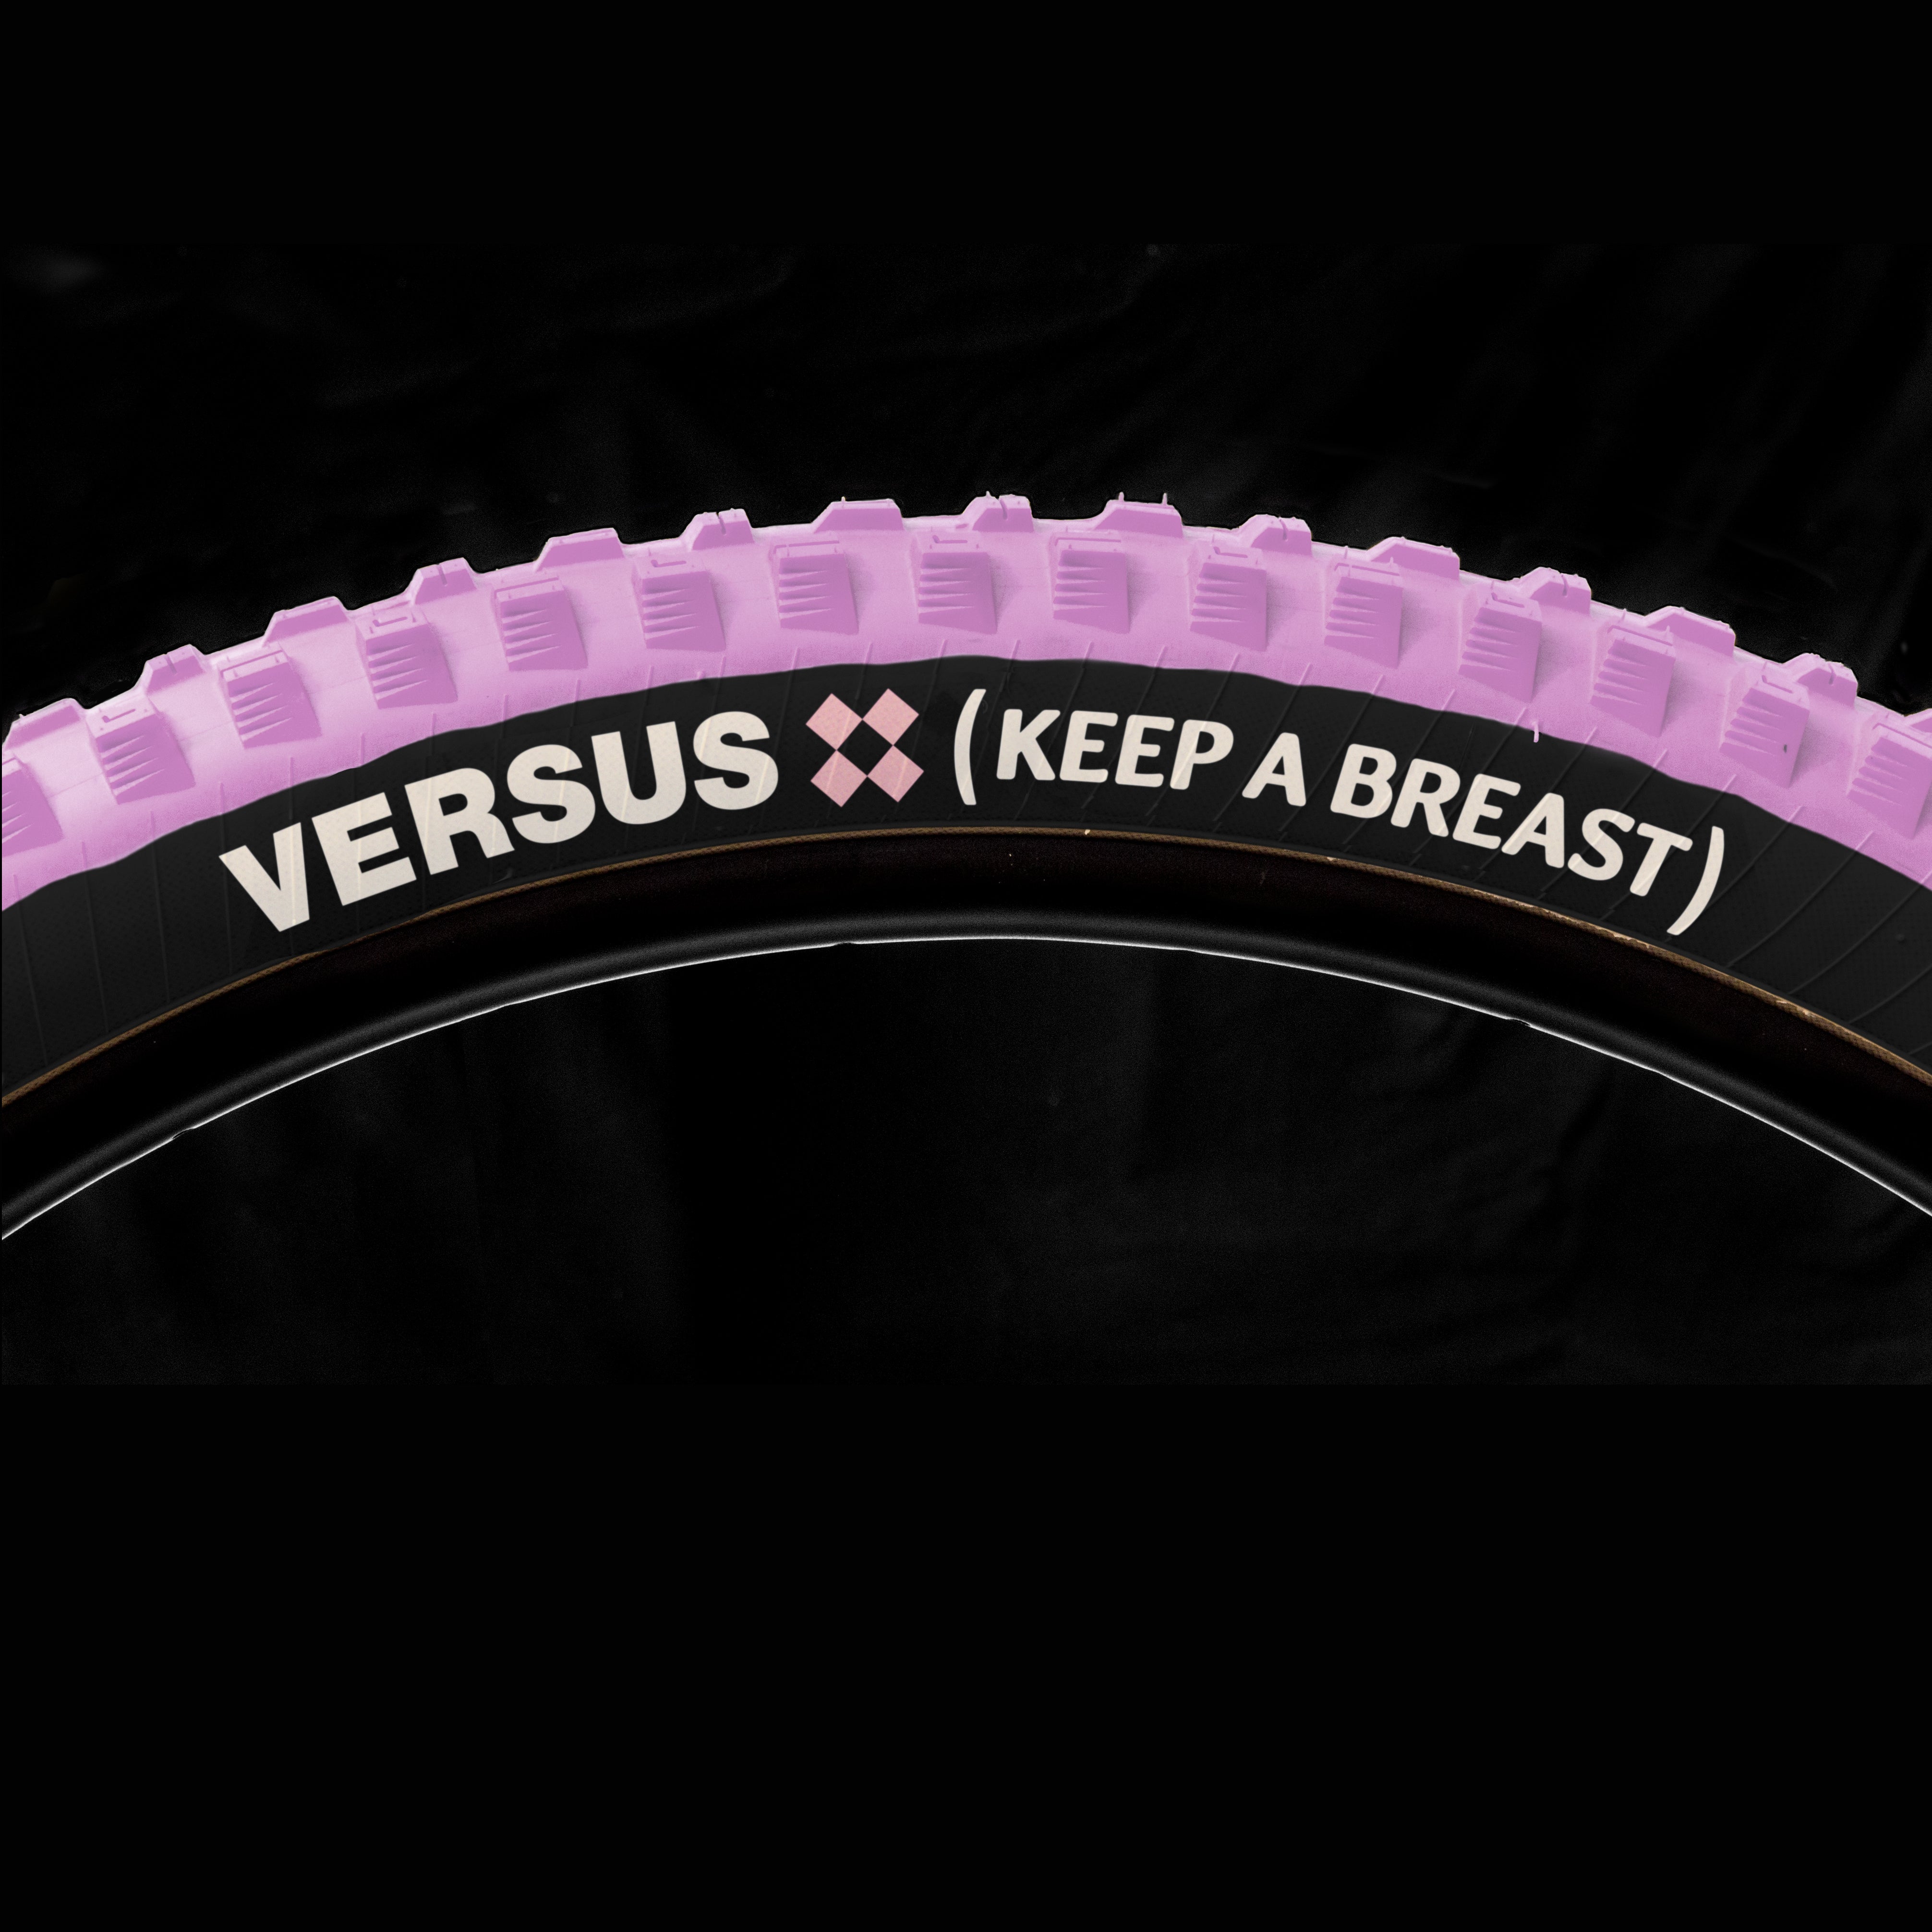 Versus Tires x Keep A Breast Collab Hot Patch